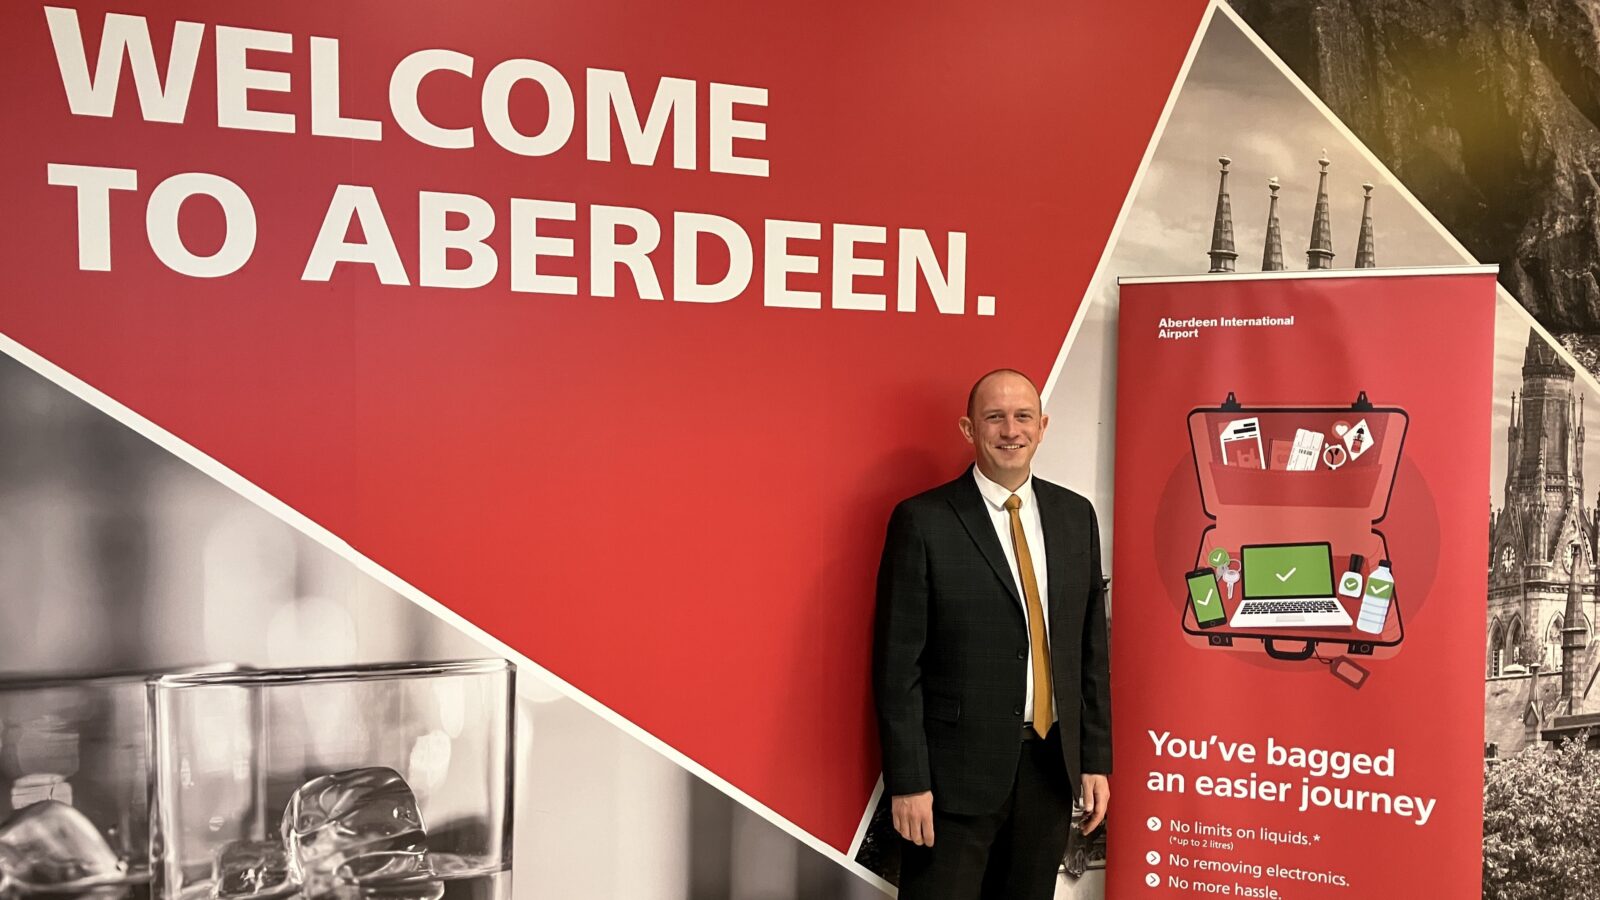 Next Generation Security Checkpoint screening goes live at Aberdeen International Airport